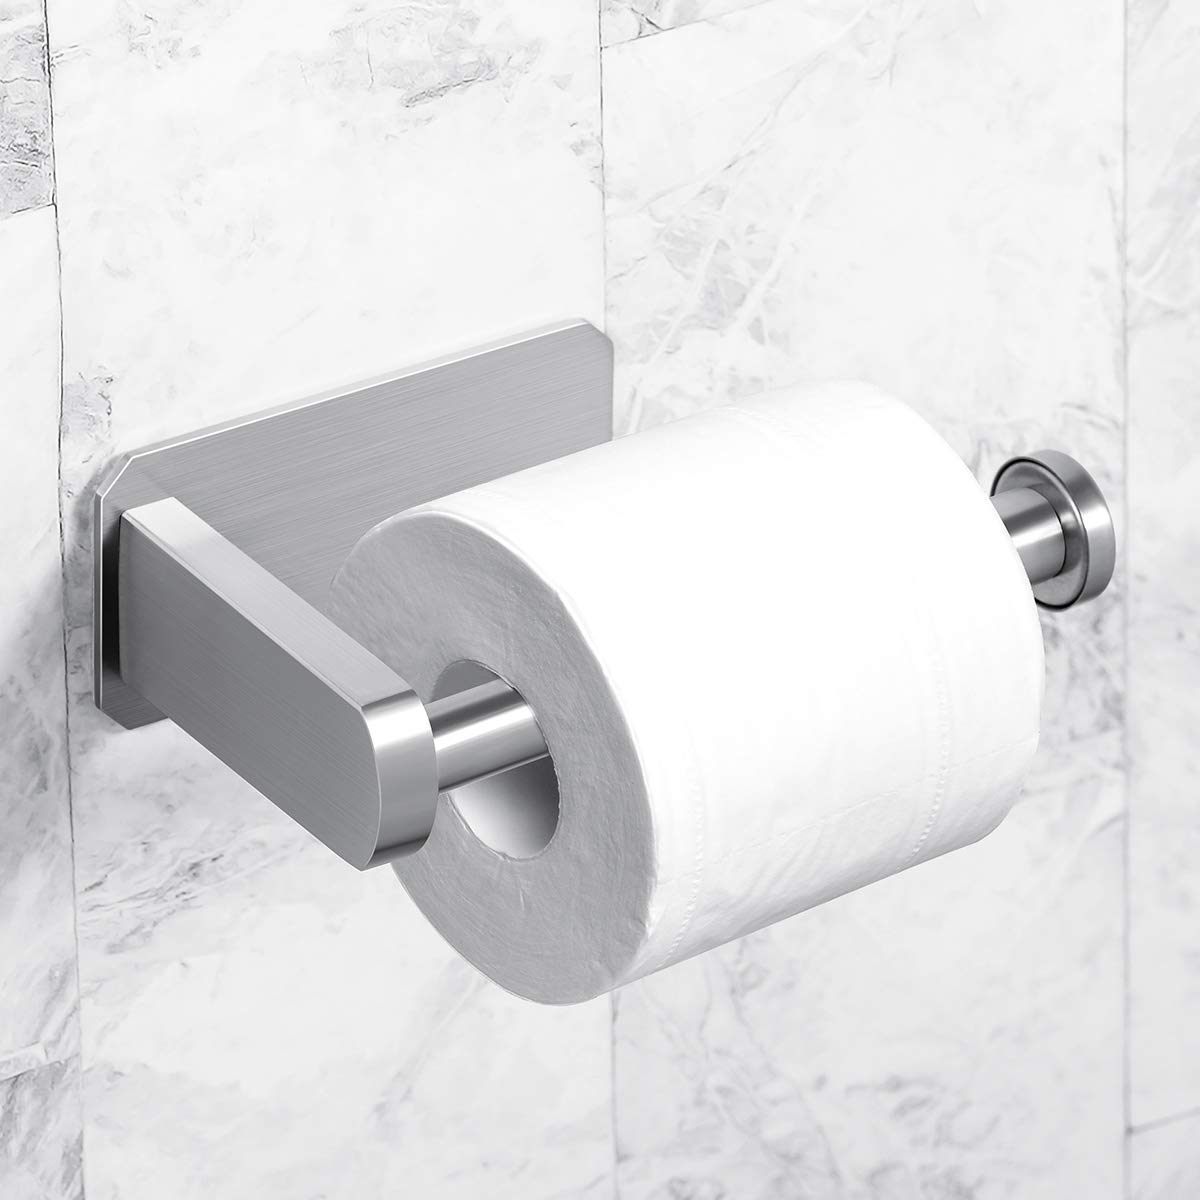 VAEHOLD Adhesive Paper Towel Holder and Toilet Paper Holder